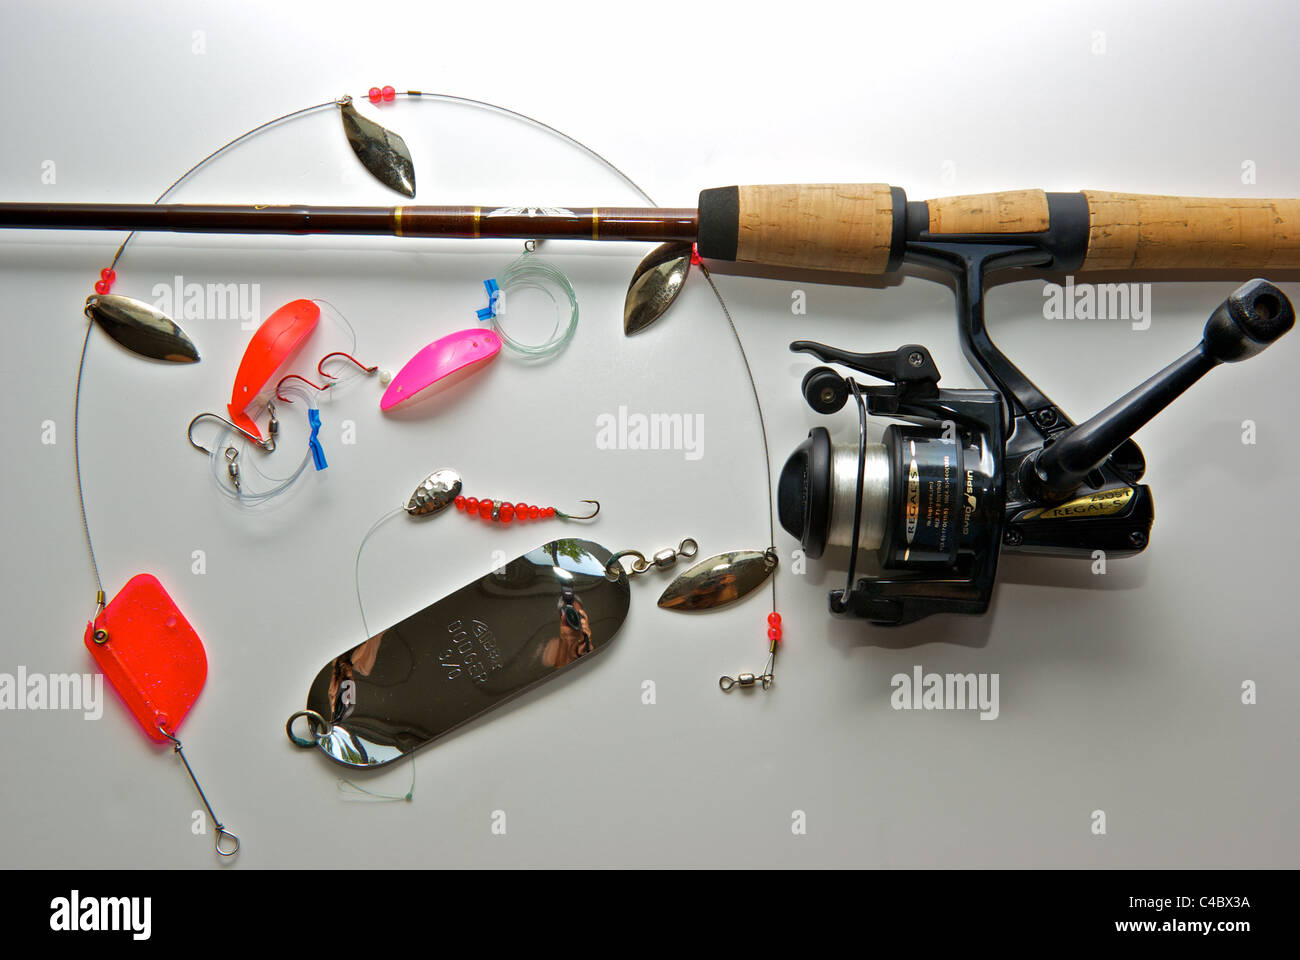 Kokanee fishing outfit willow leaf gang troll Apex Killer Wedding Band lures  Dodger attractor light spinning rod reel Stock Photo - Alamy